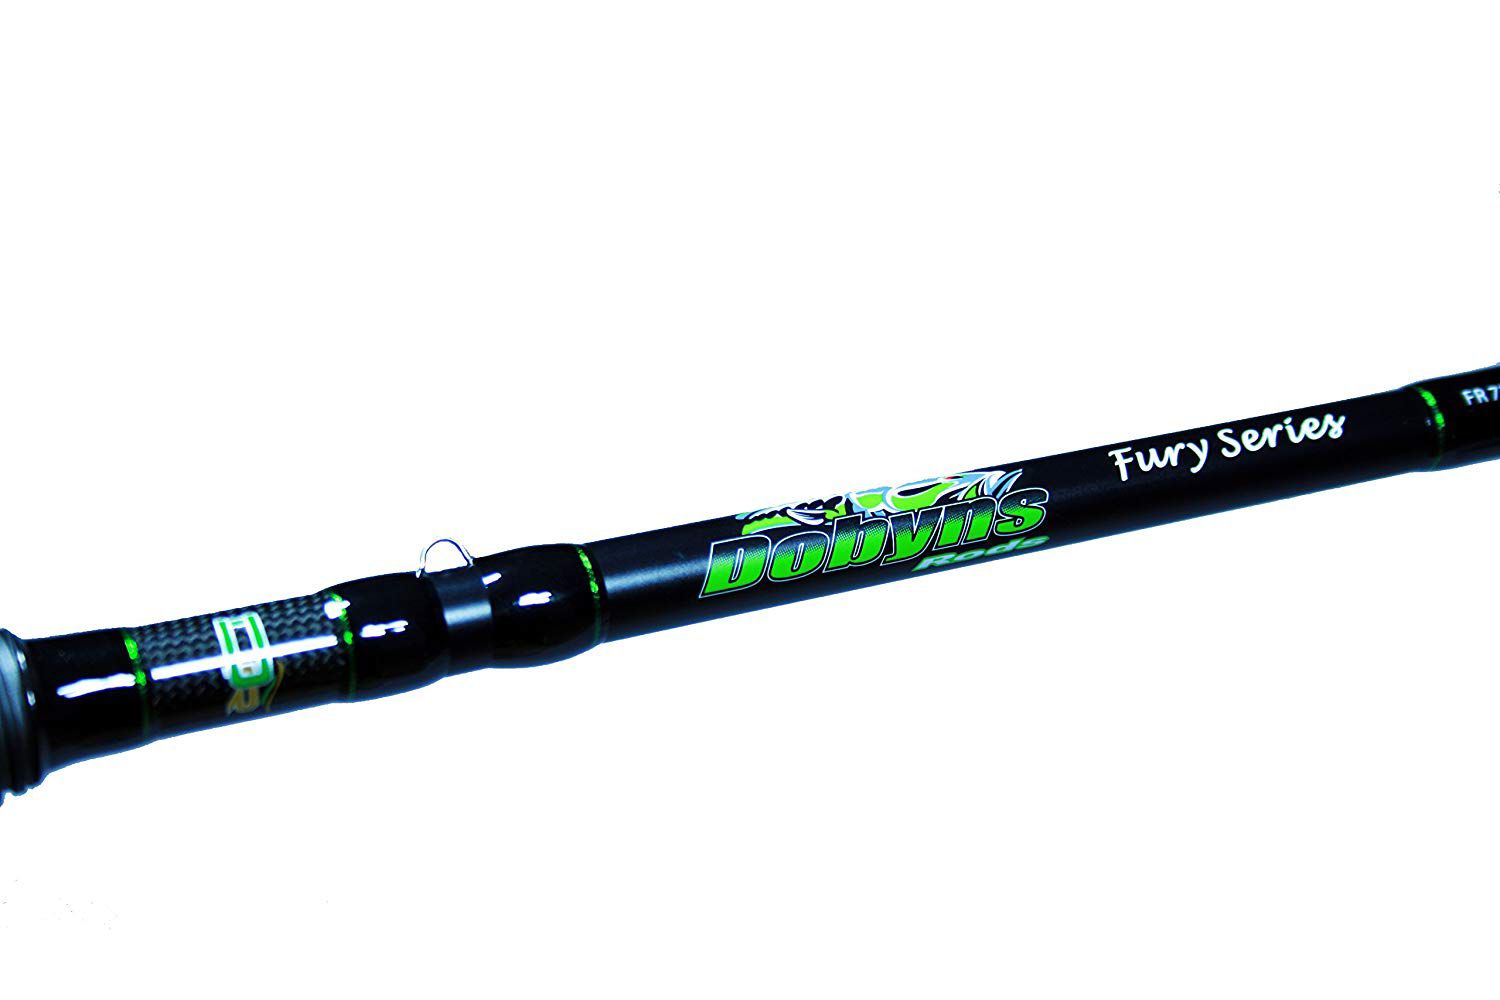 Dick's Sporting Goods Dobyns Fury Casting Rod